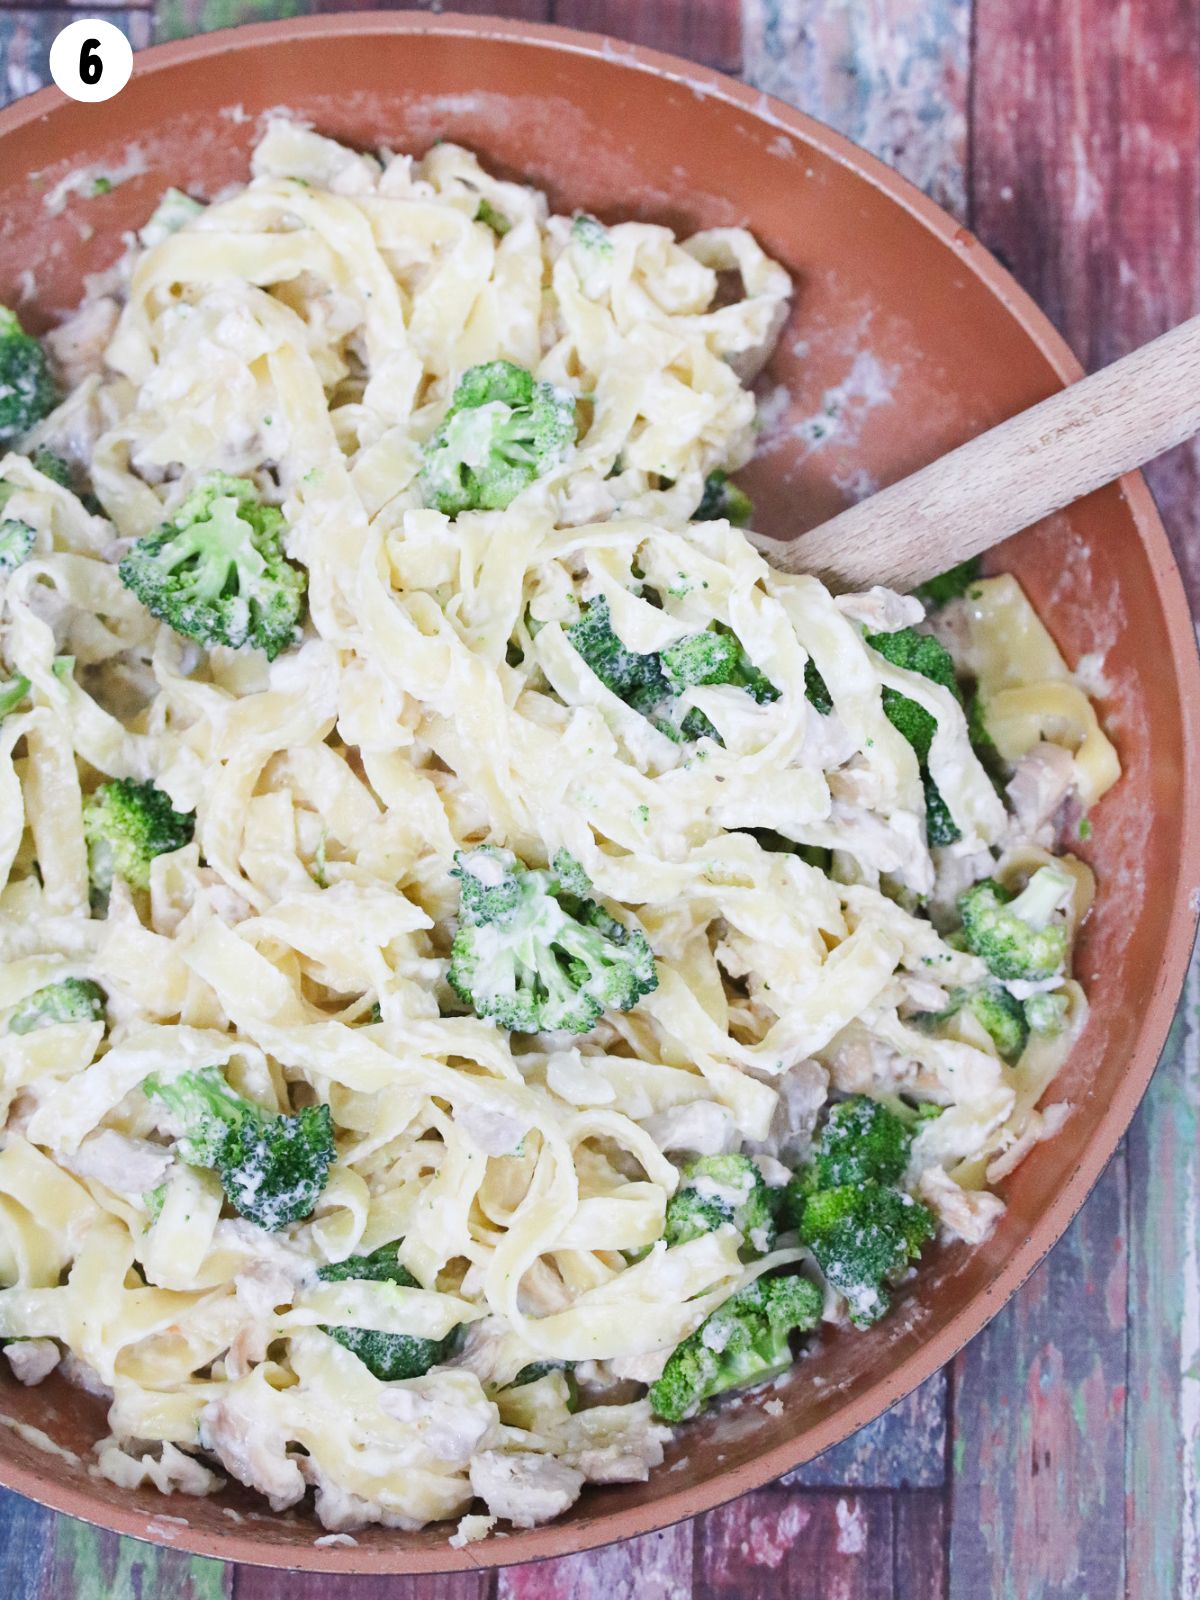 bowl of pasta with Alfredo sauce, broccoli and chicken.